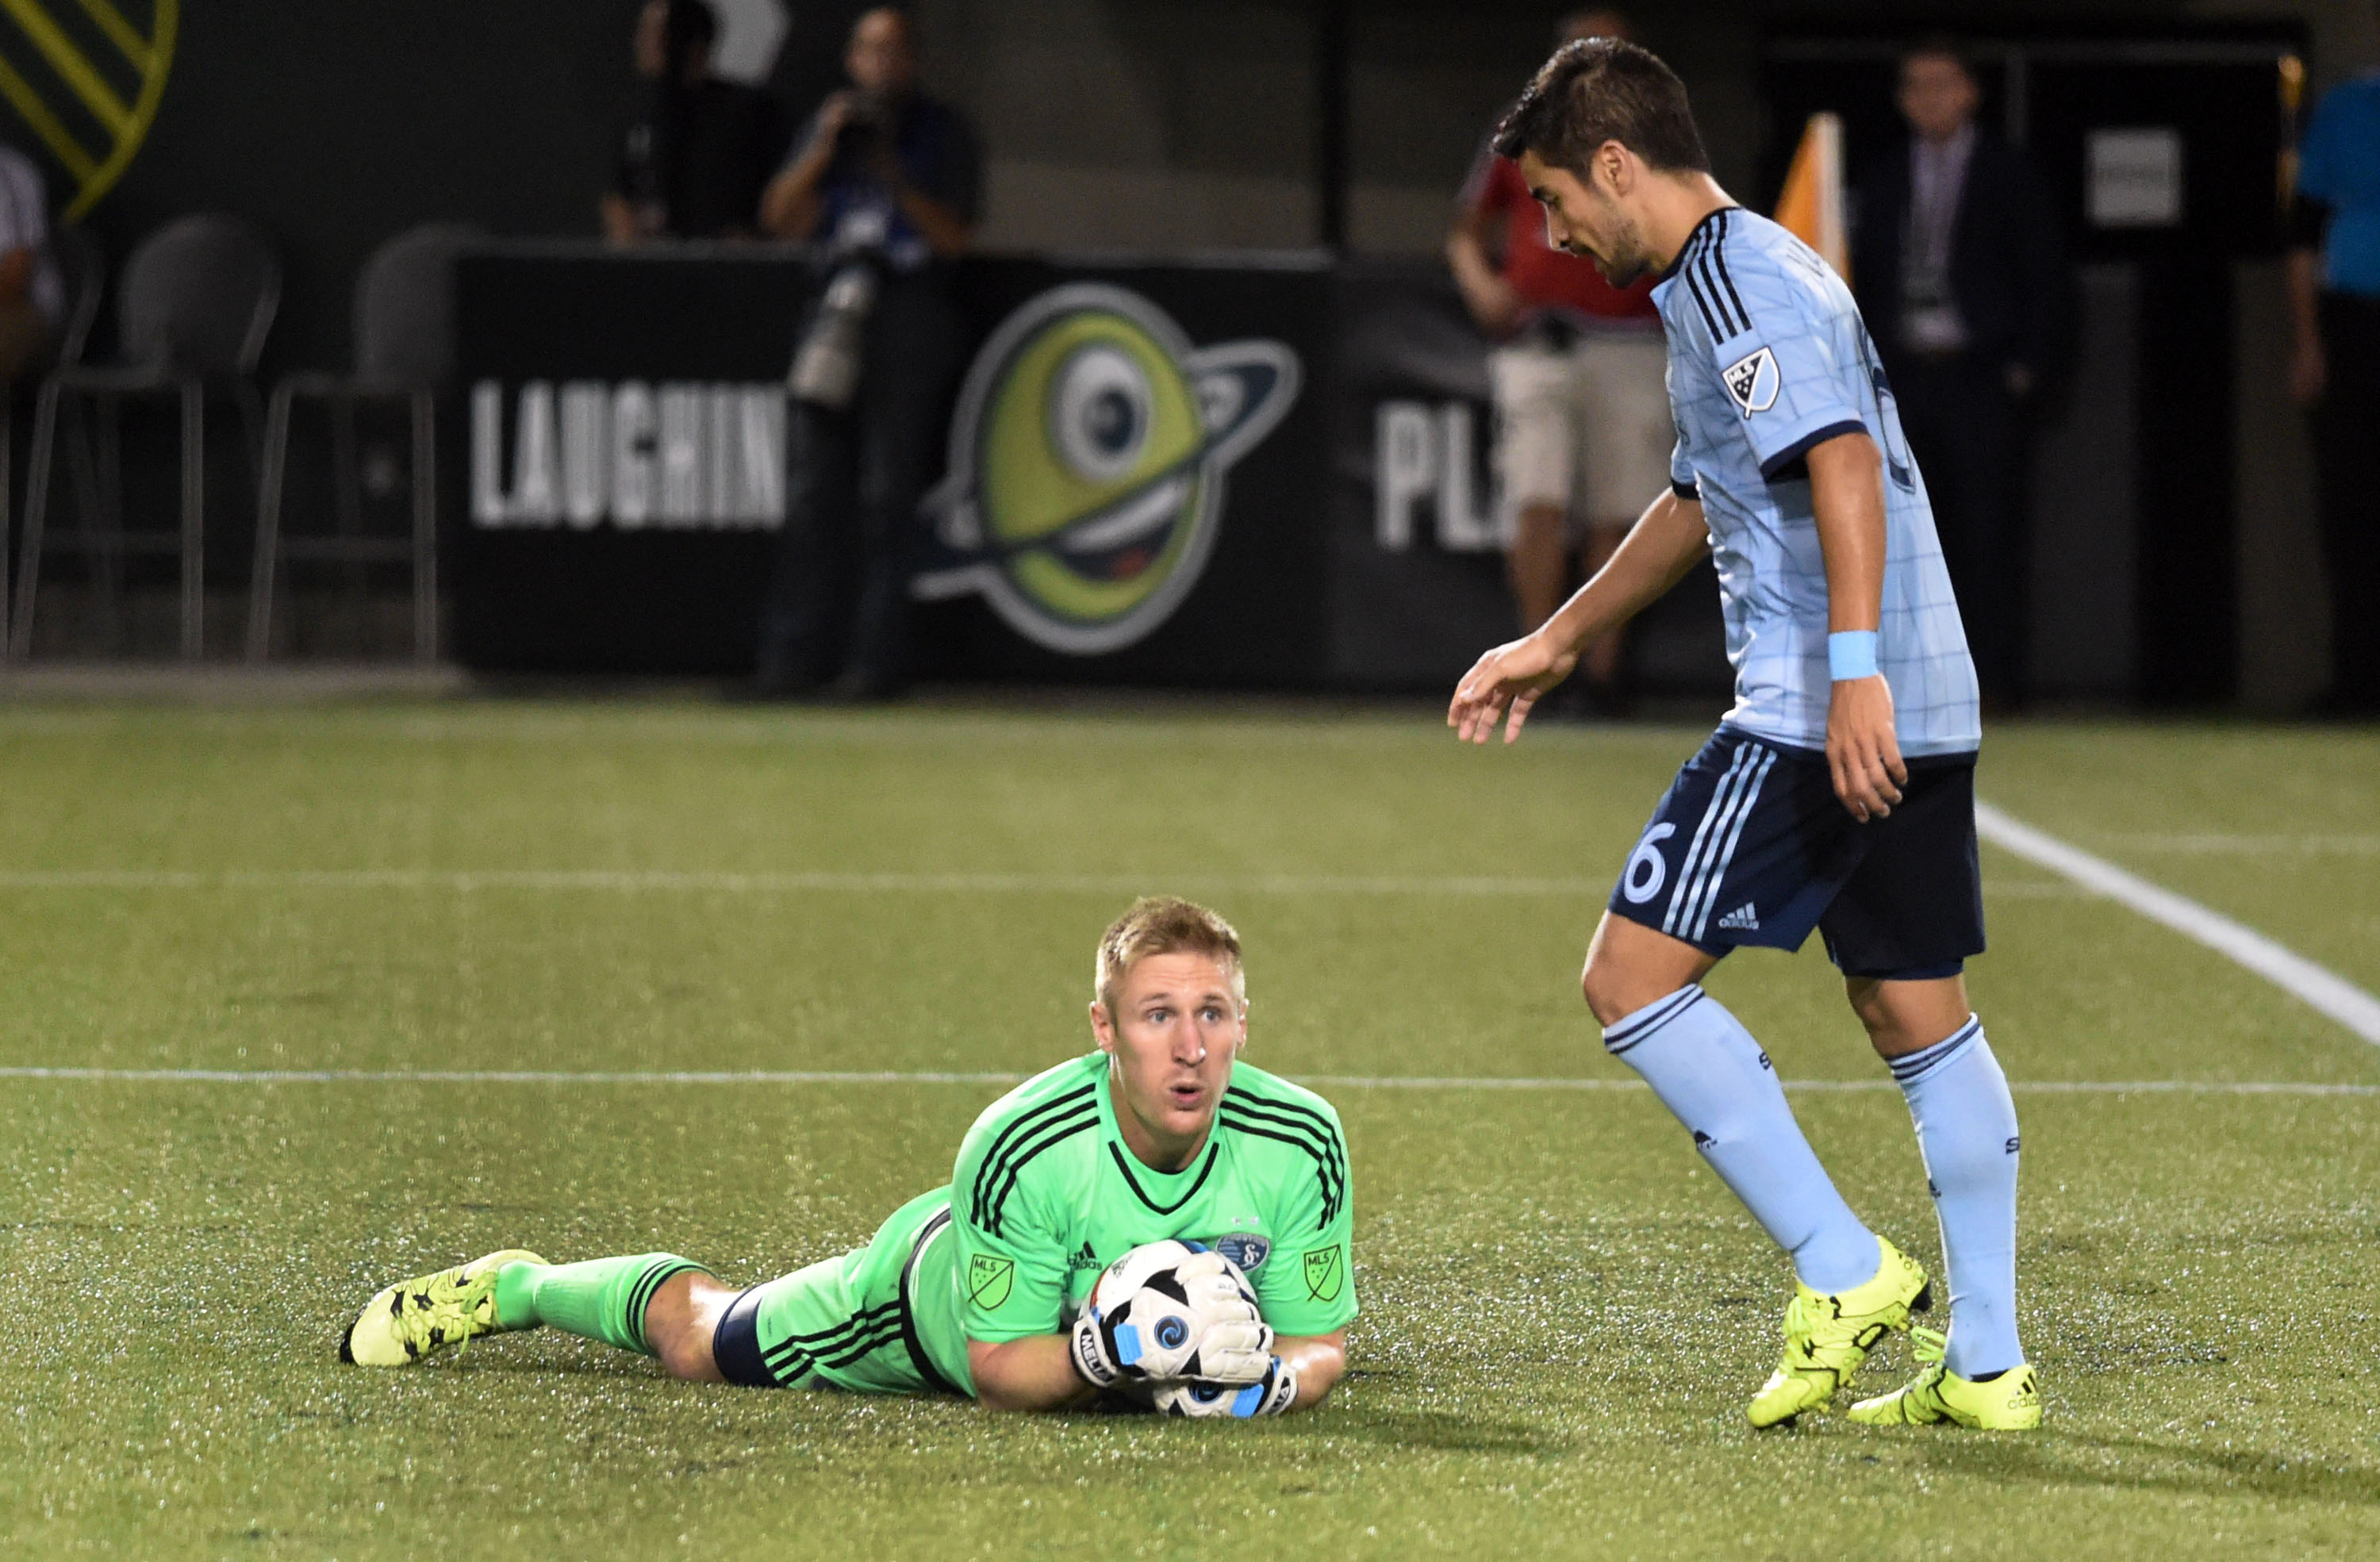 Just like this ball, Sporting KC are safe in Tim Melia's hands for 2016.